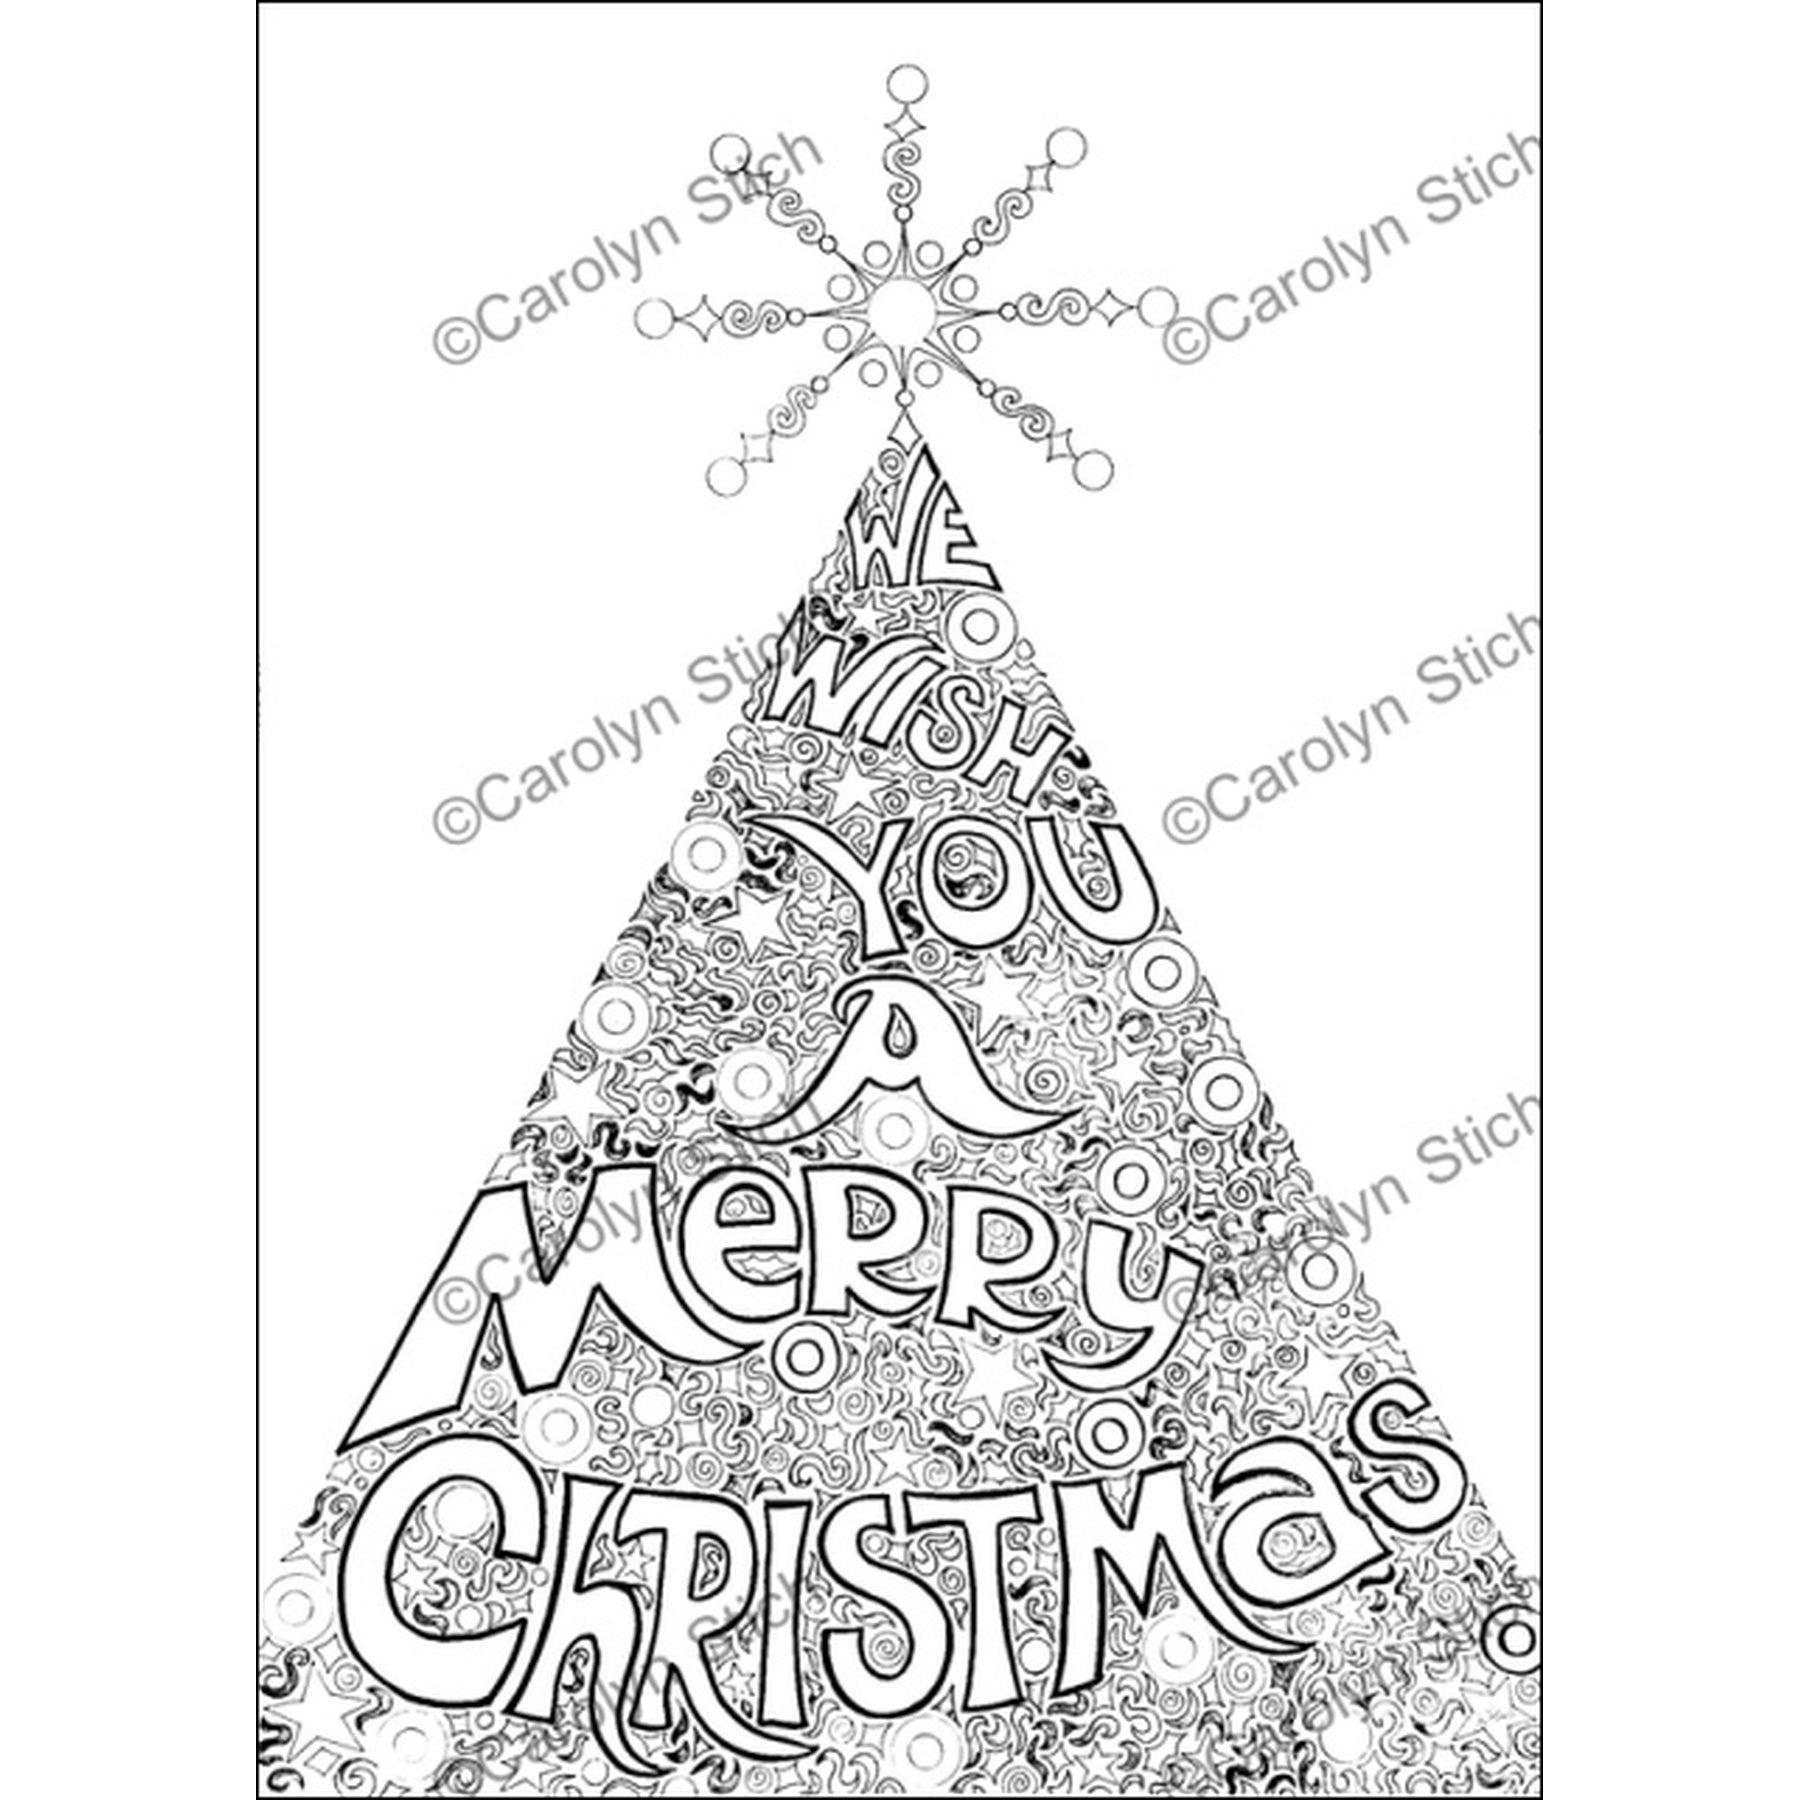 Christmas Wishes, rug hooking pattern